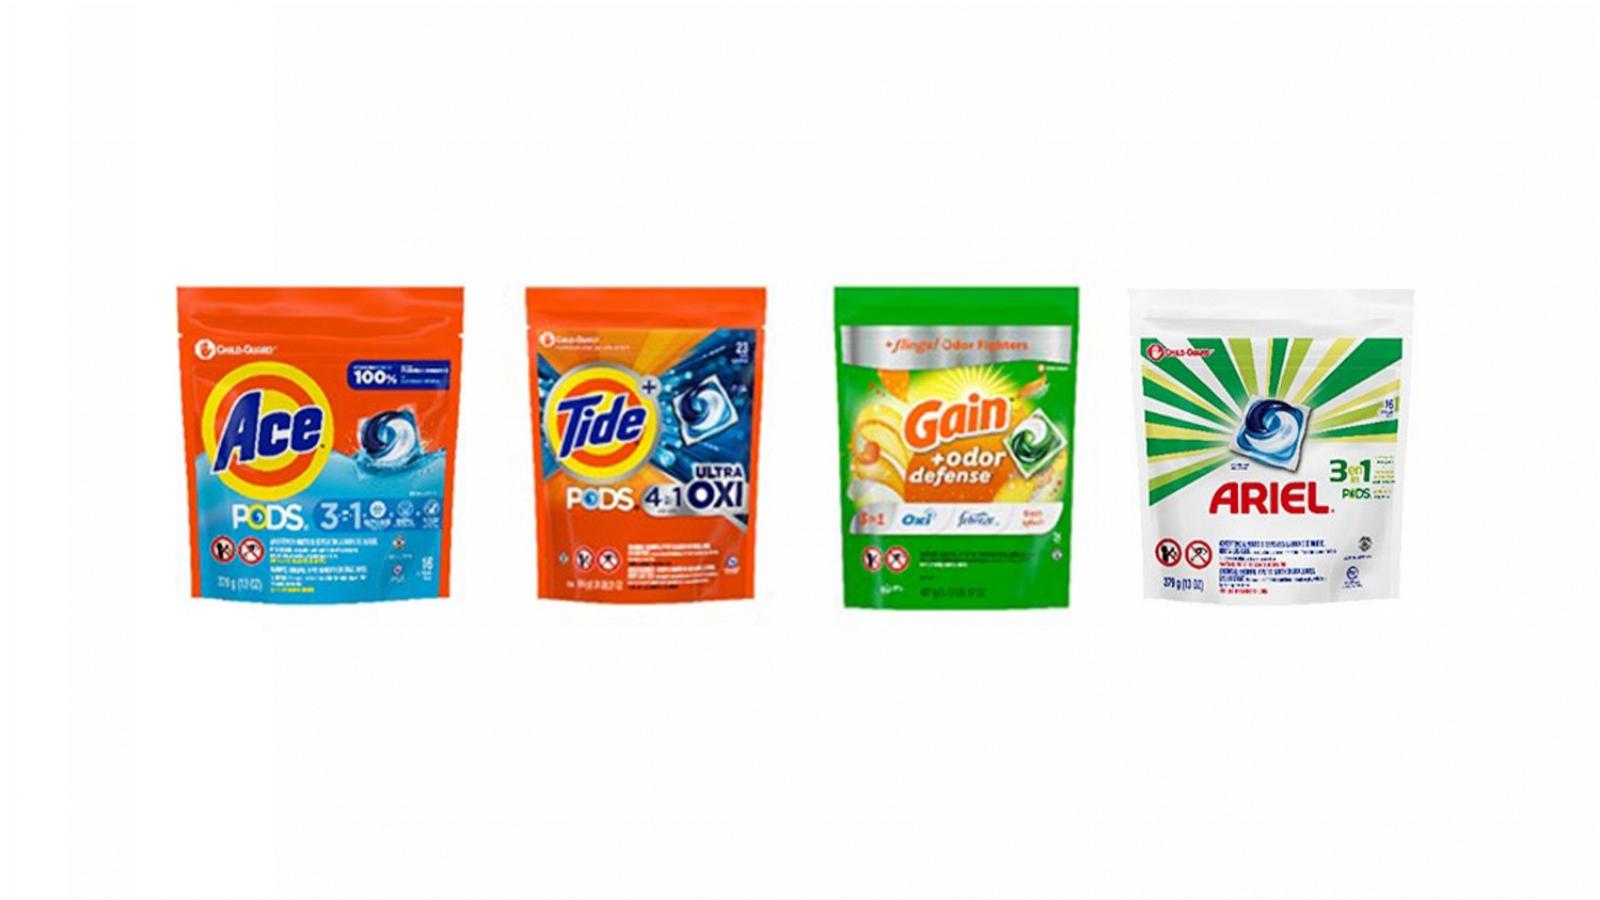 Millions of Laundry Soap Packs Recalled: What Families Need to Know About the Tide and Gain Alert